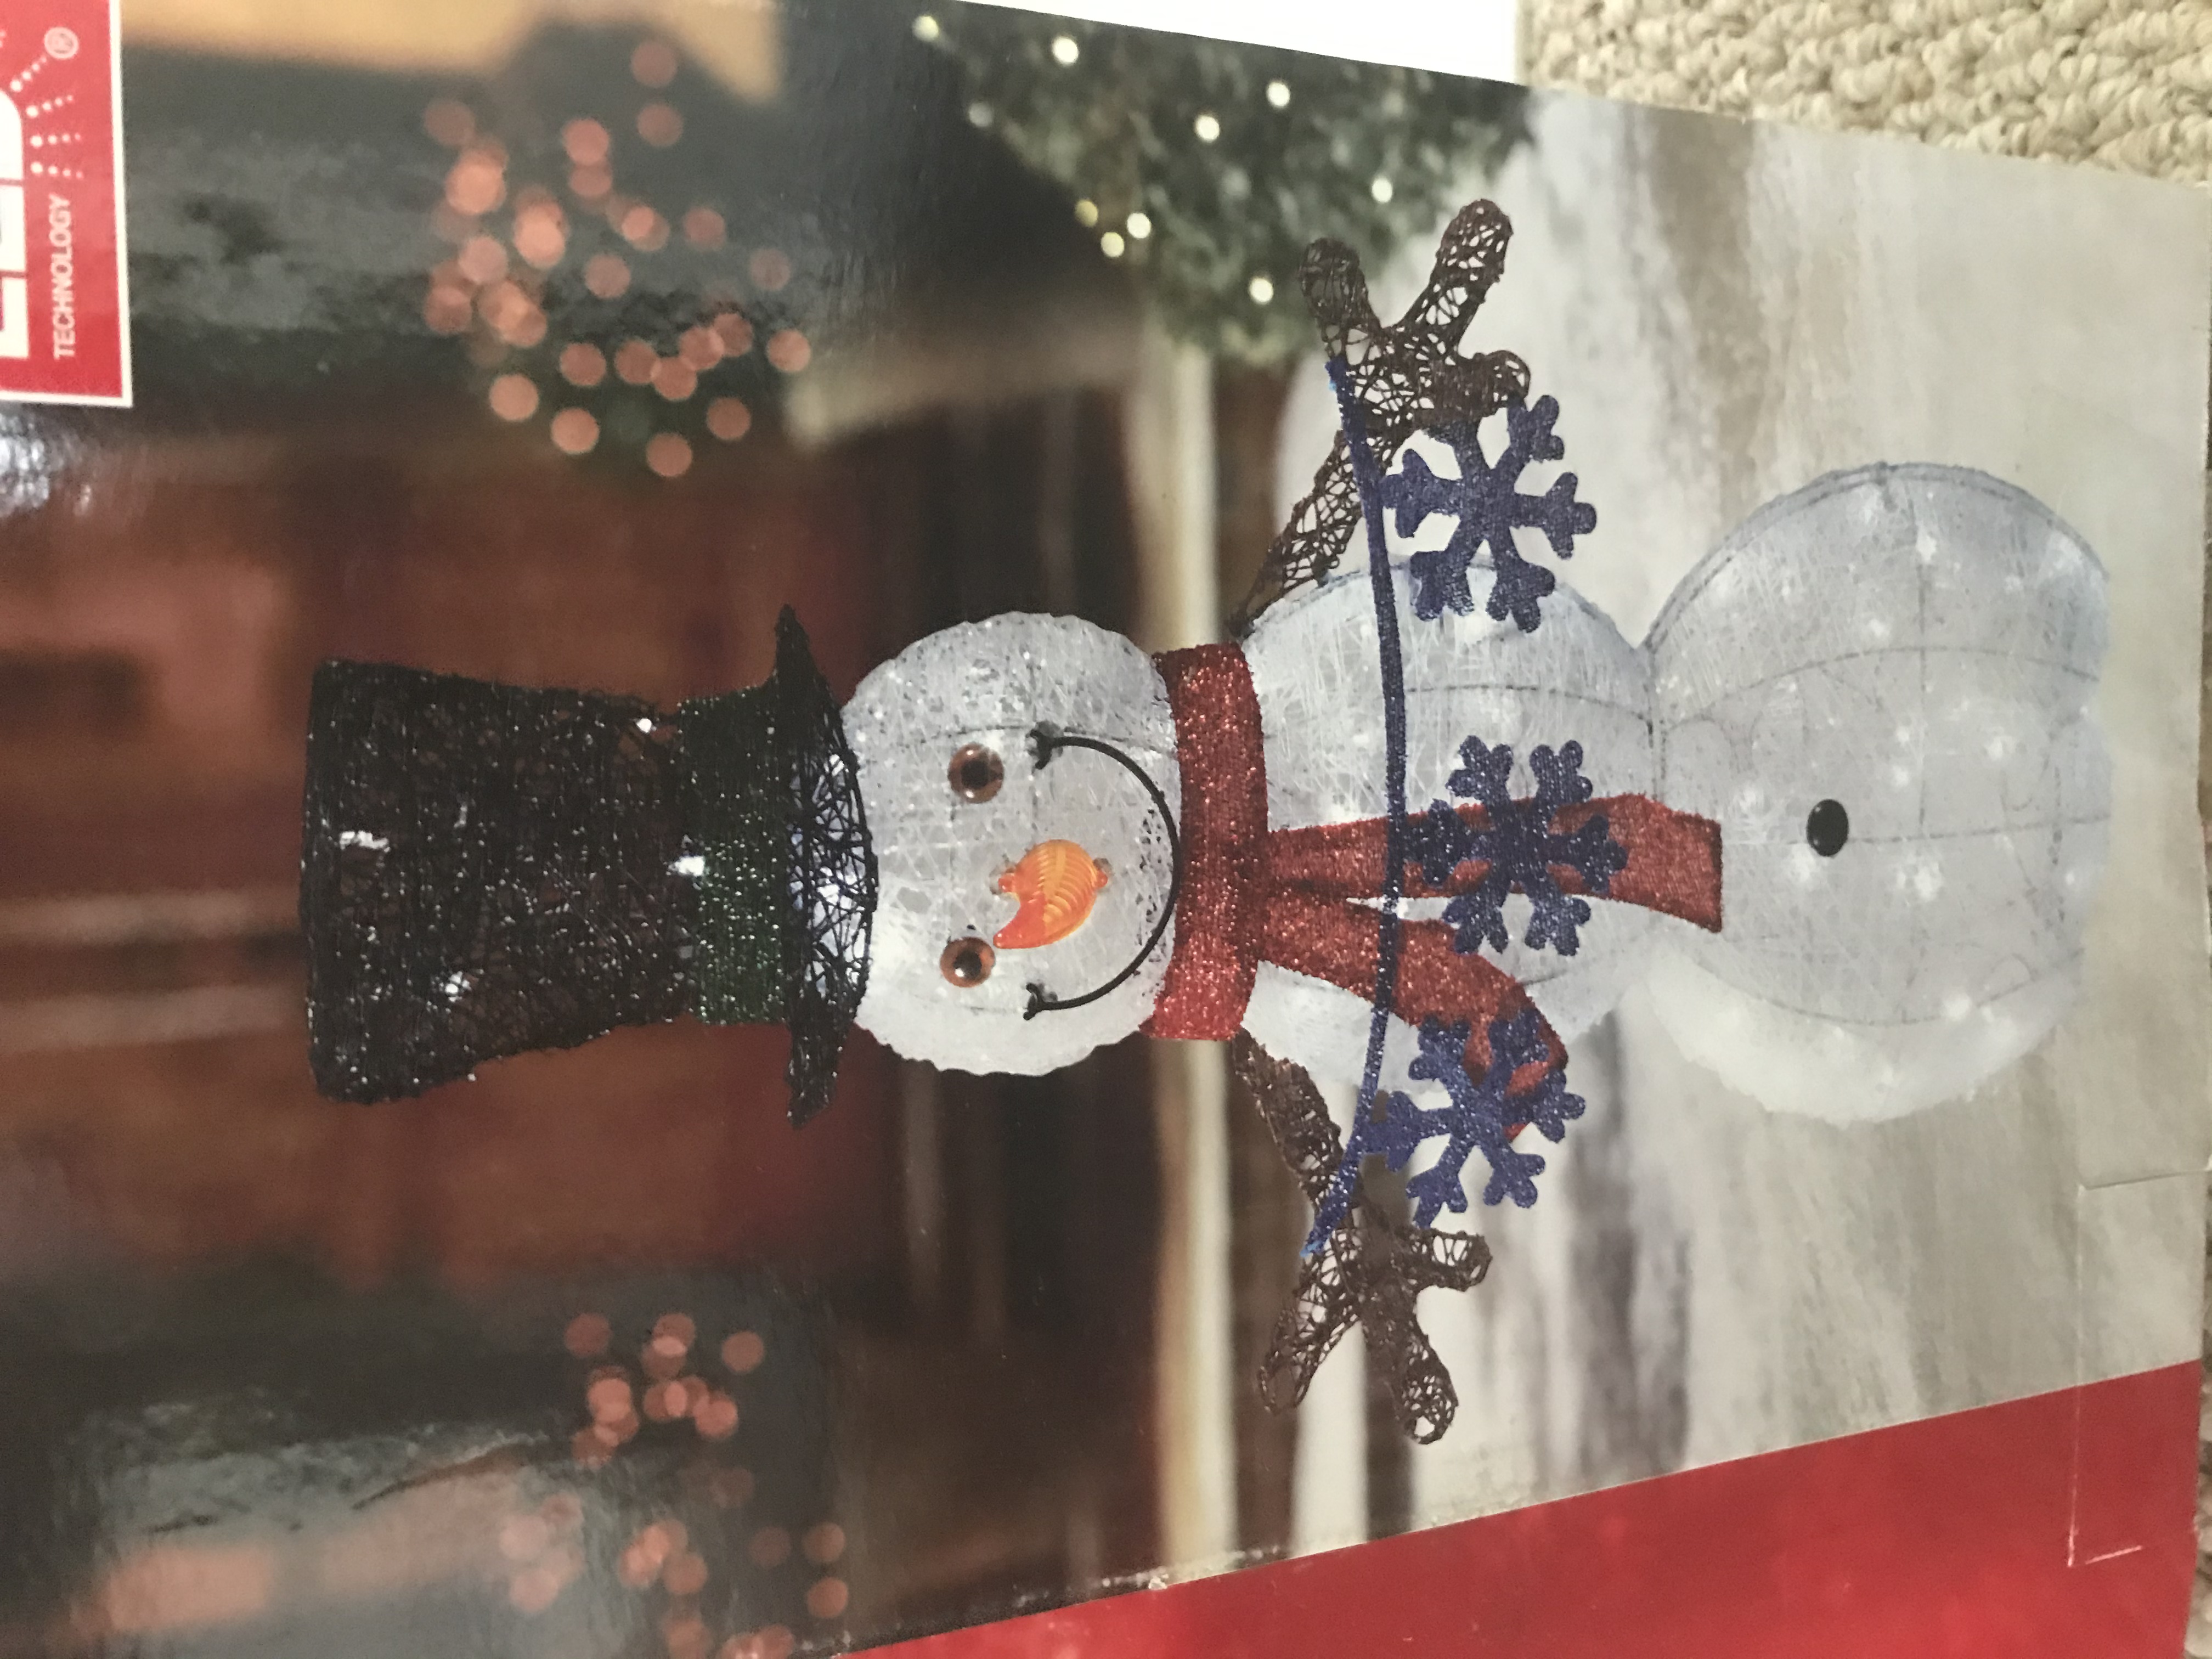 Used     3 ft LED Snowman with Snowflake